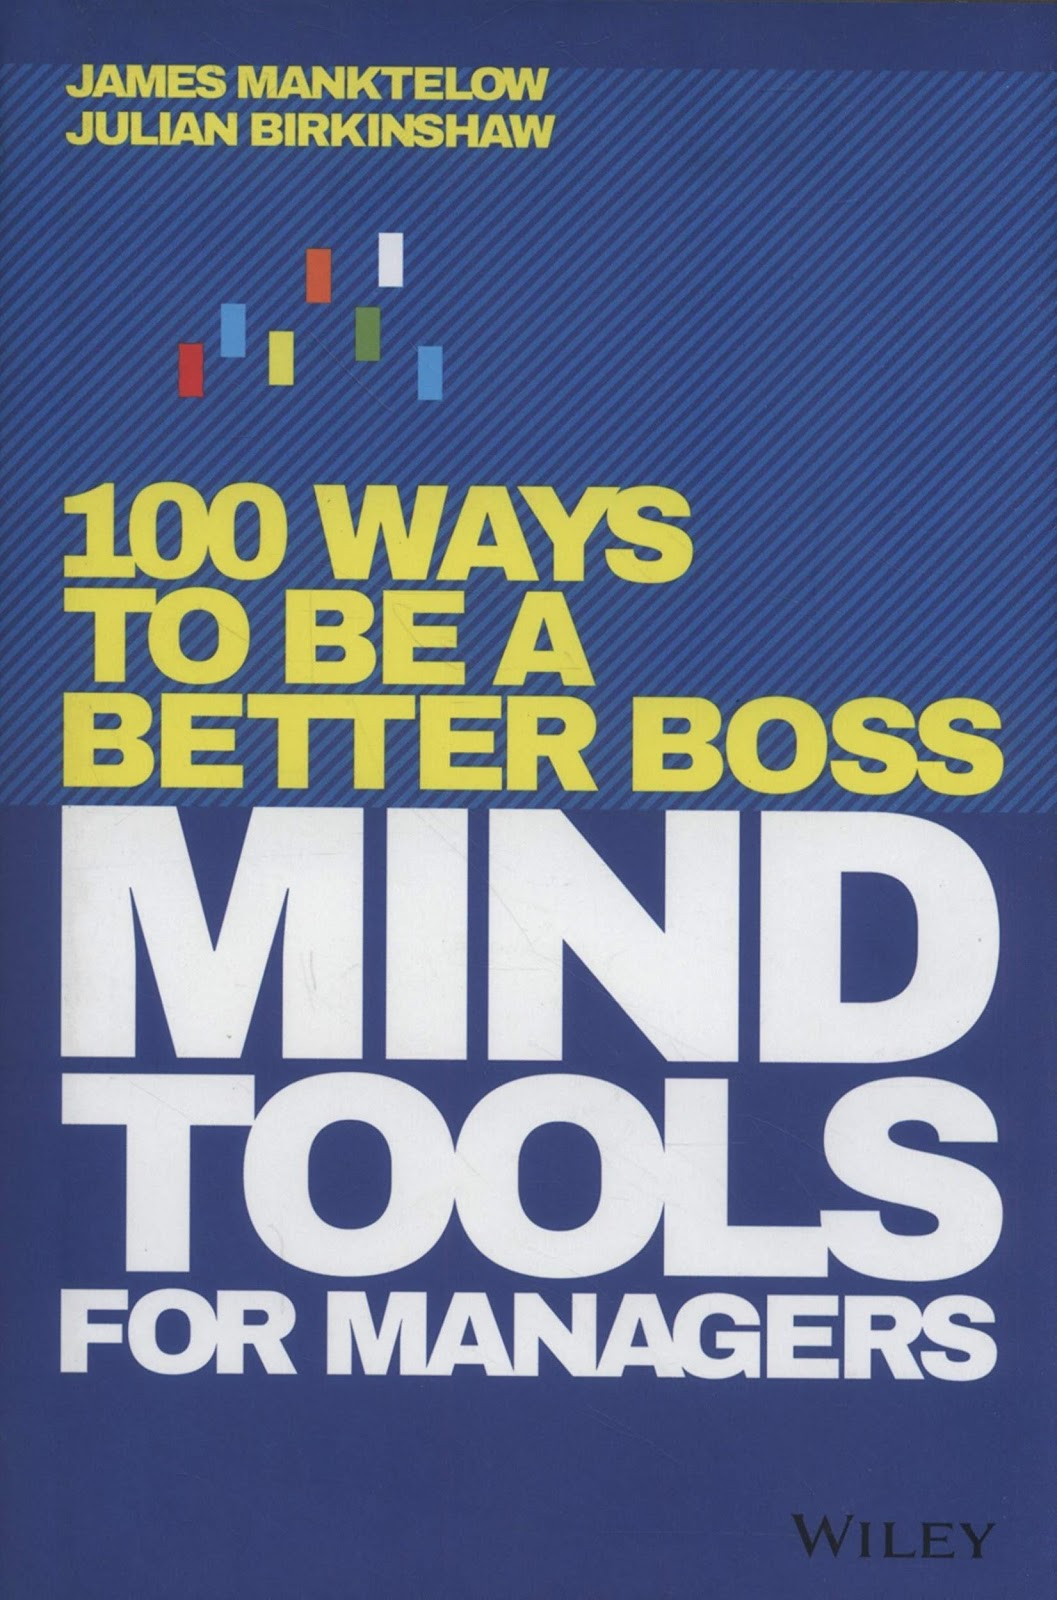 Book 'Mind Tools of Managers'